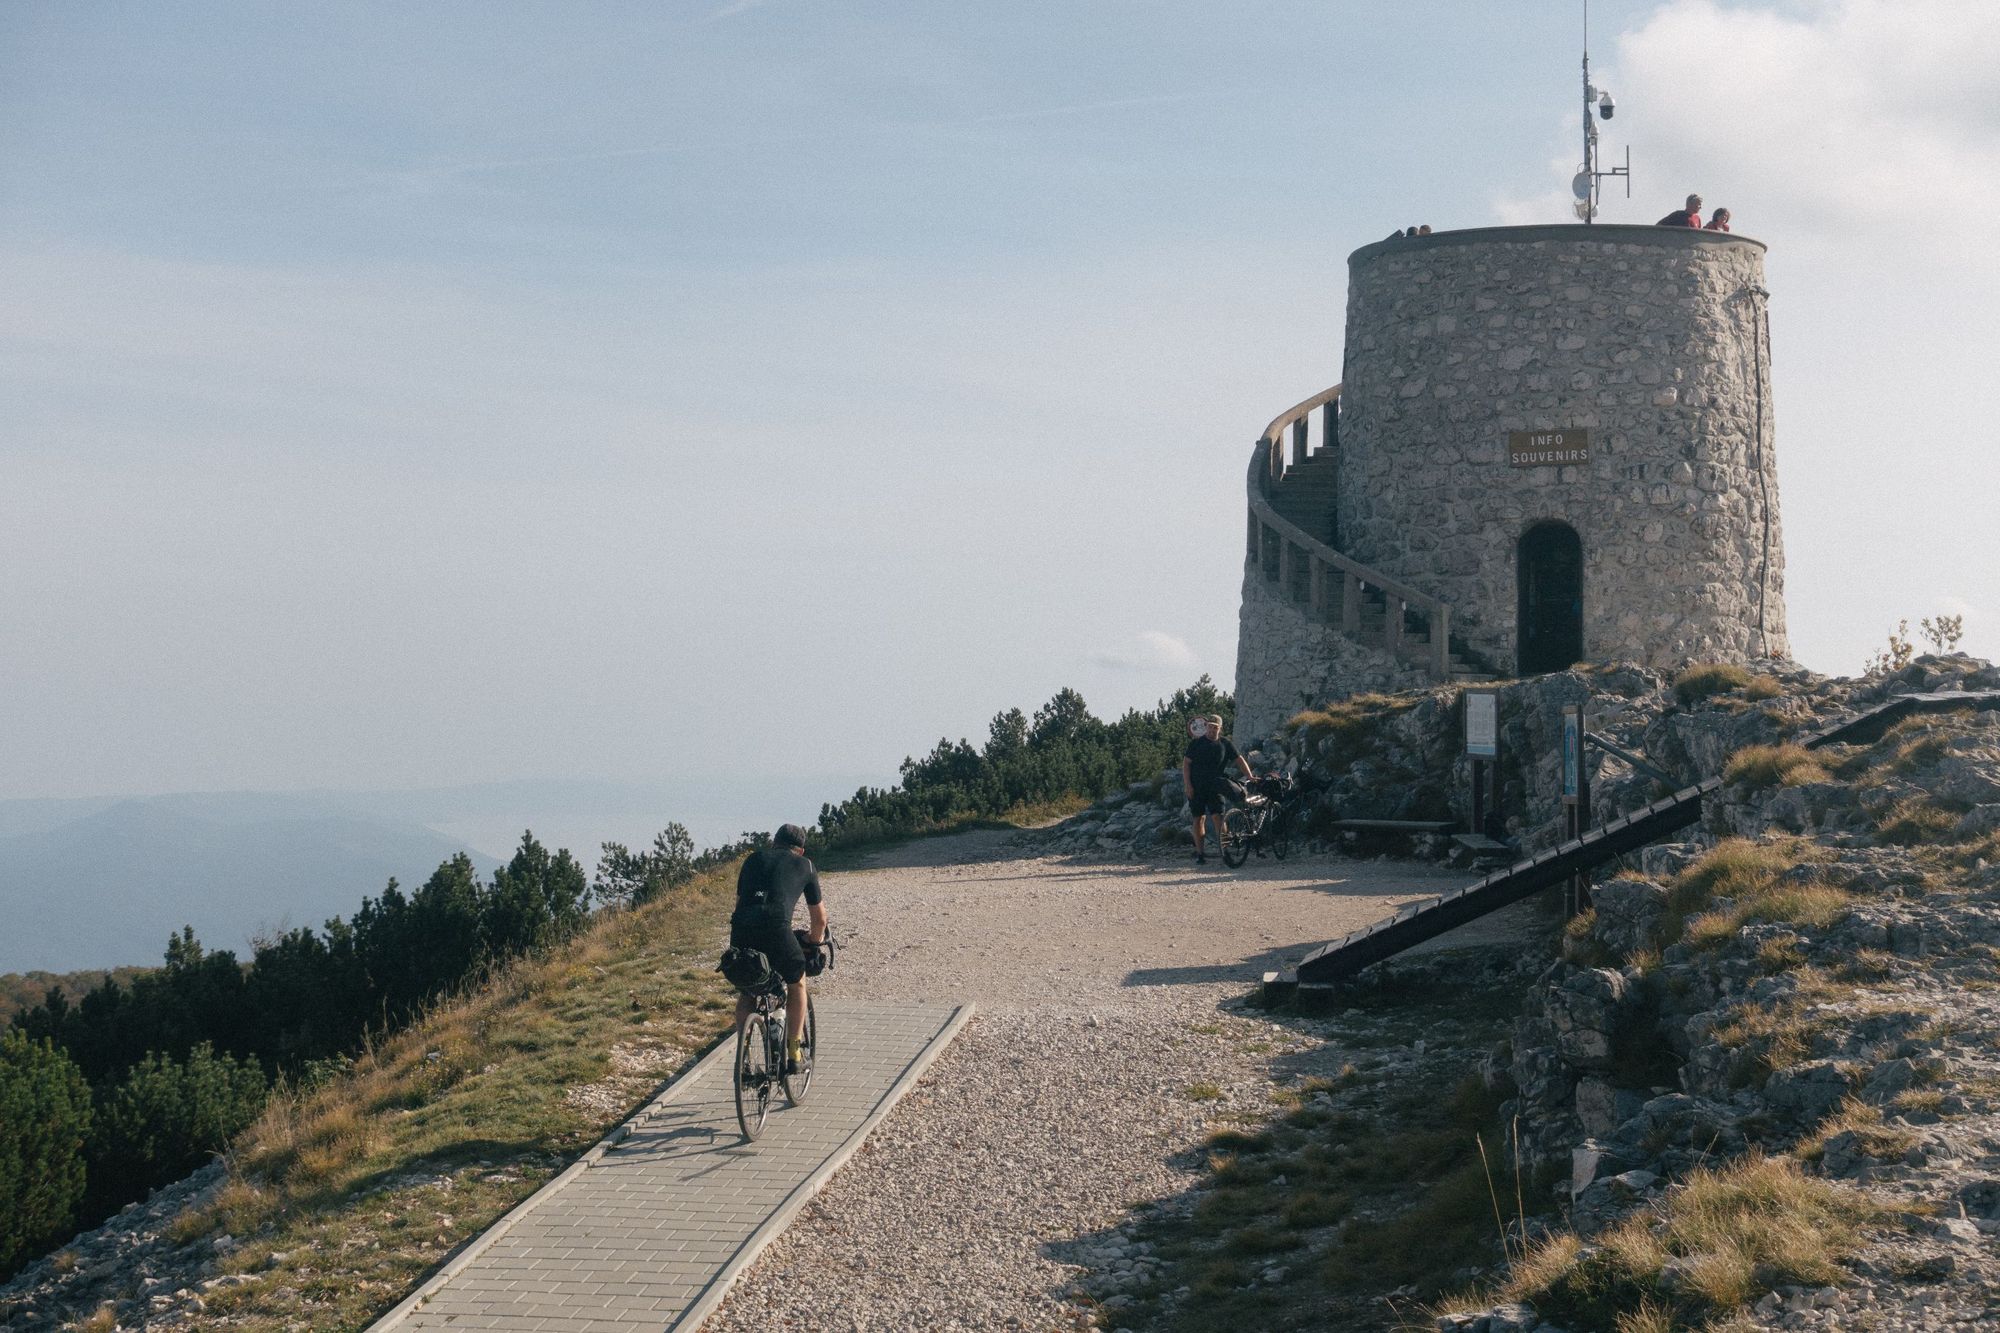 Two cyclists reach the top of a mountain summit in Croatia with a tower of a castle at the peak.